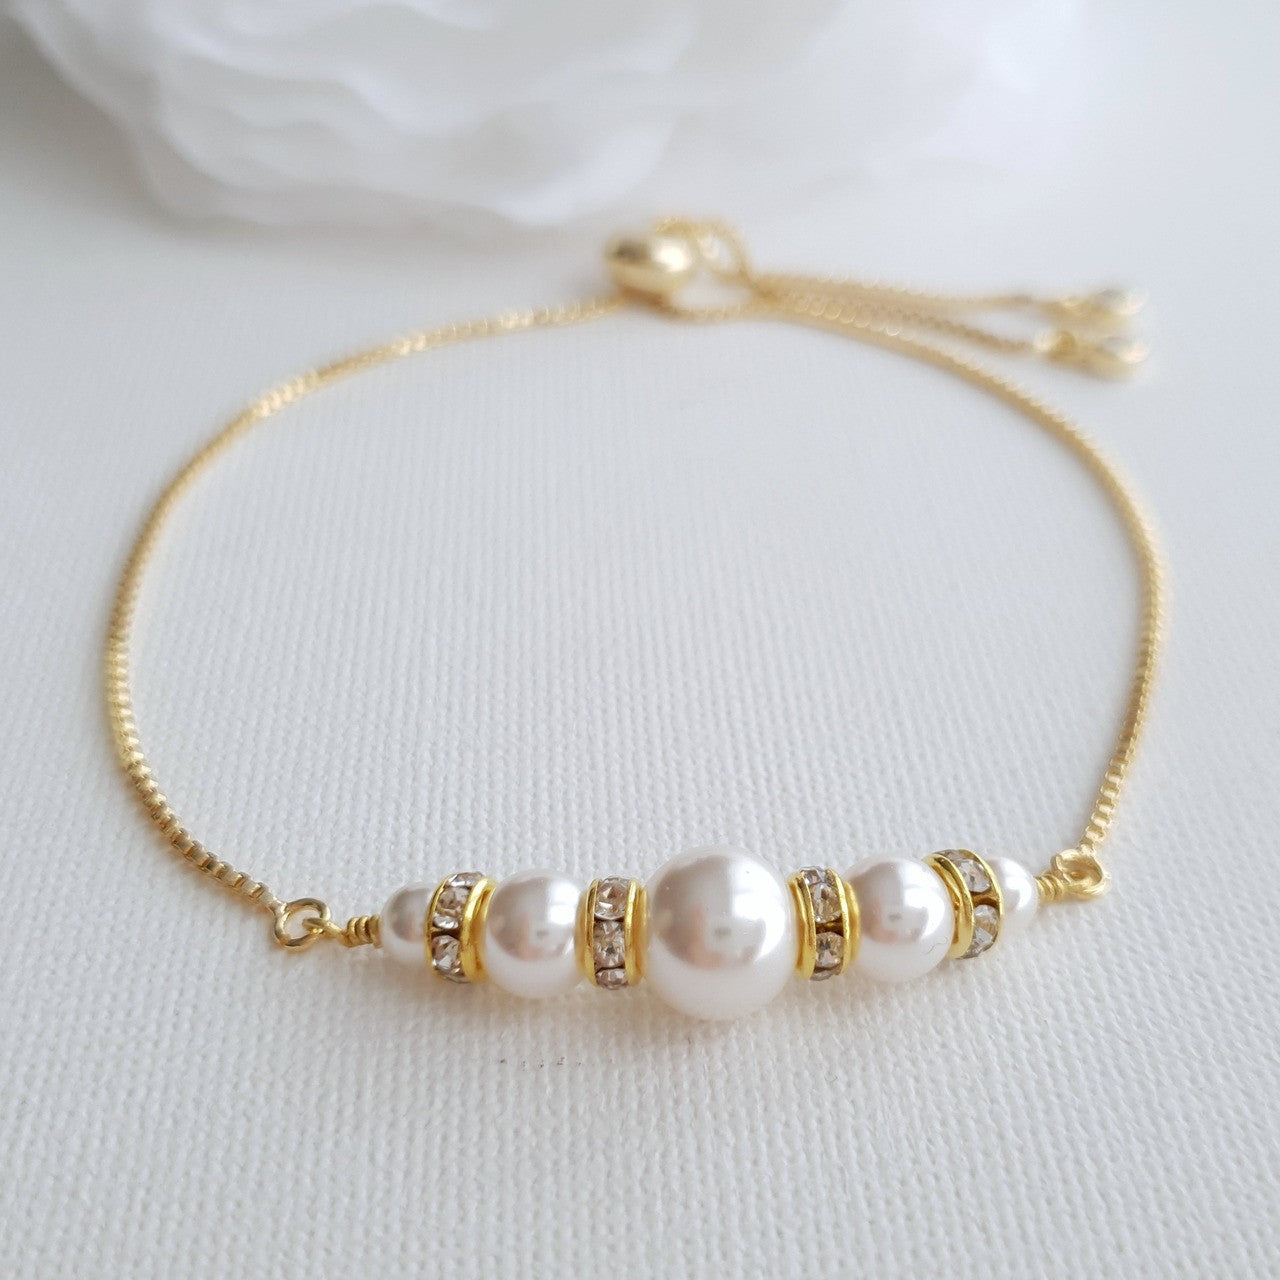 Pearl Bridesmaids Bracelet in 14K gold and  Pearls